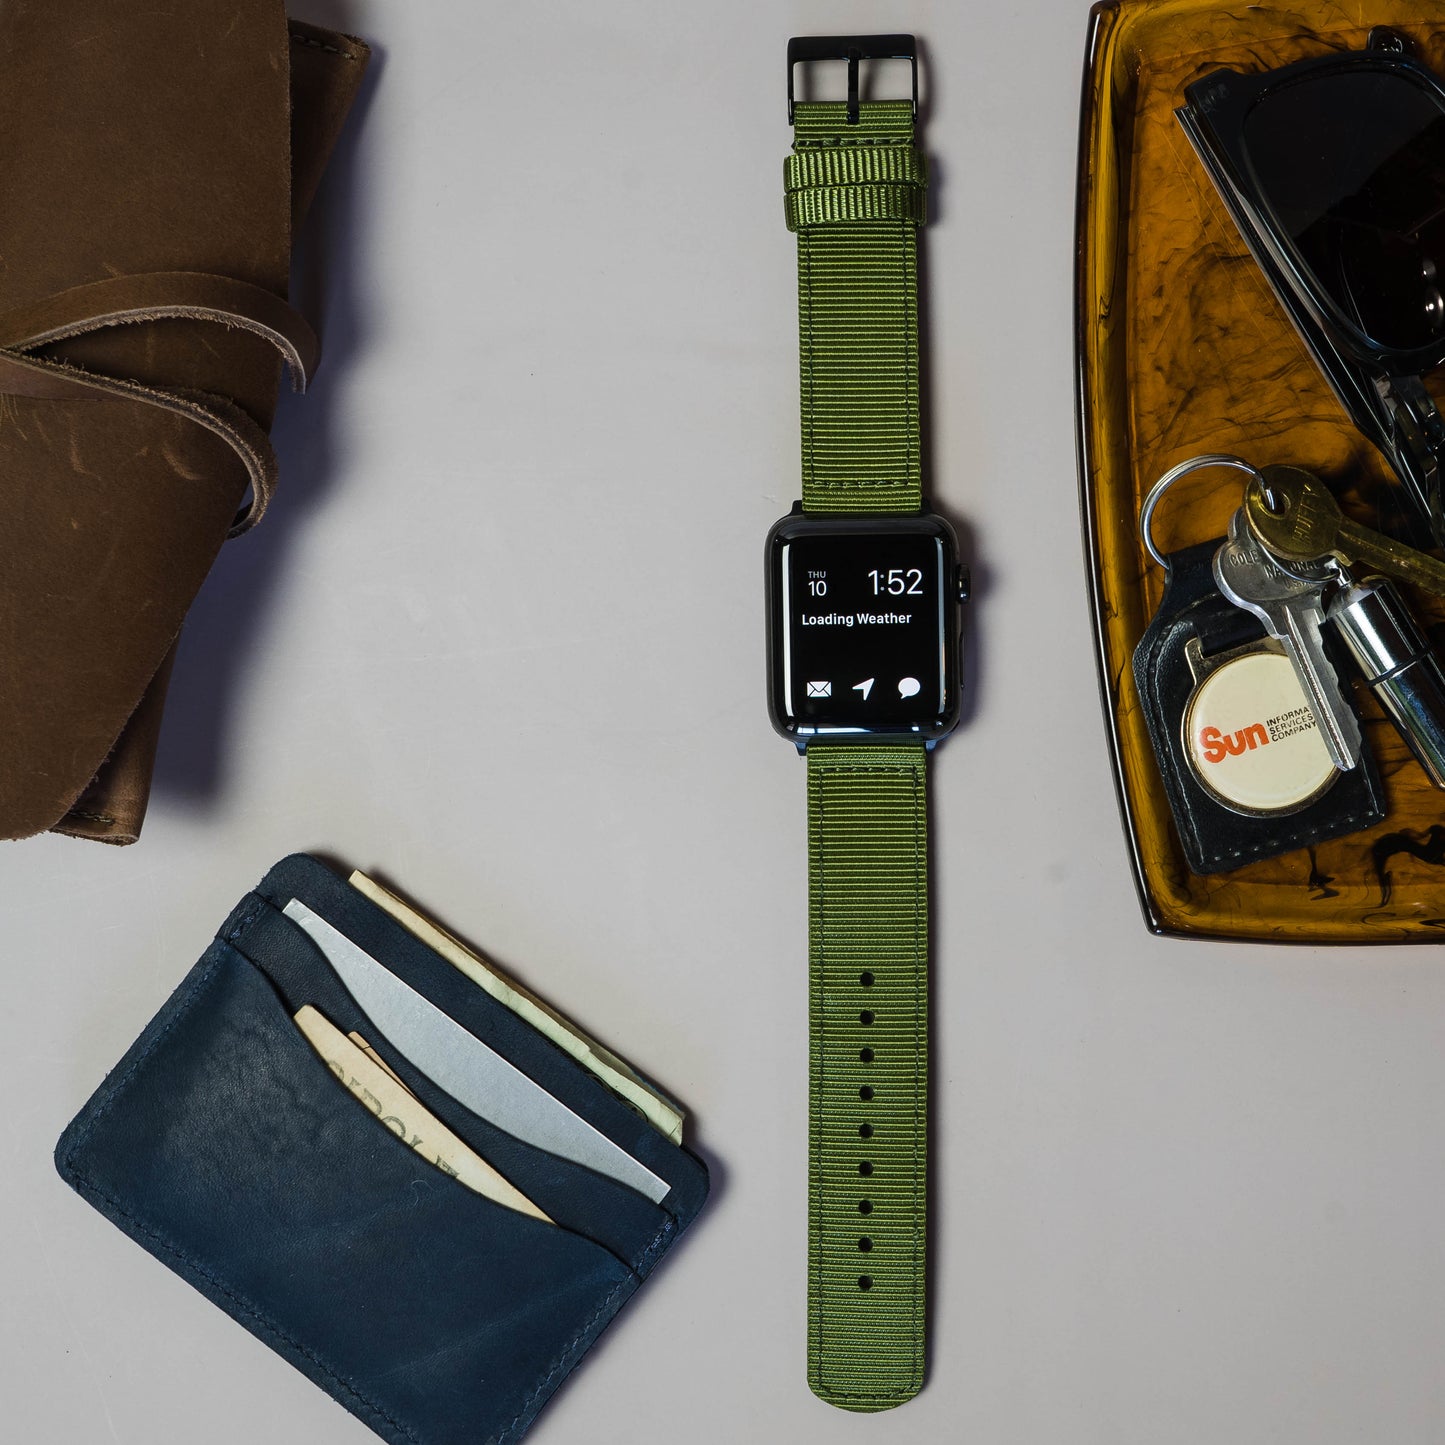 Apple Watch | Two-piece NATO Style | Army Green - Barton Watch Bands